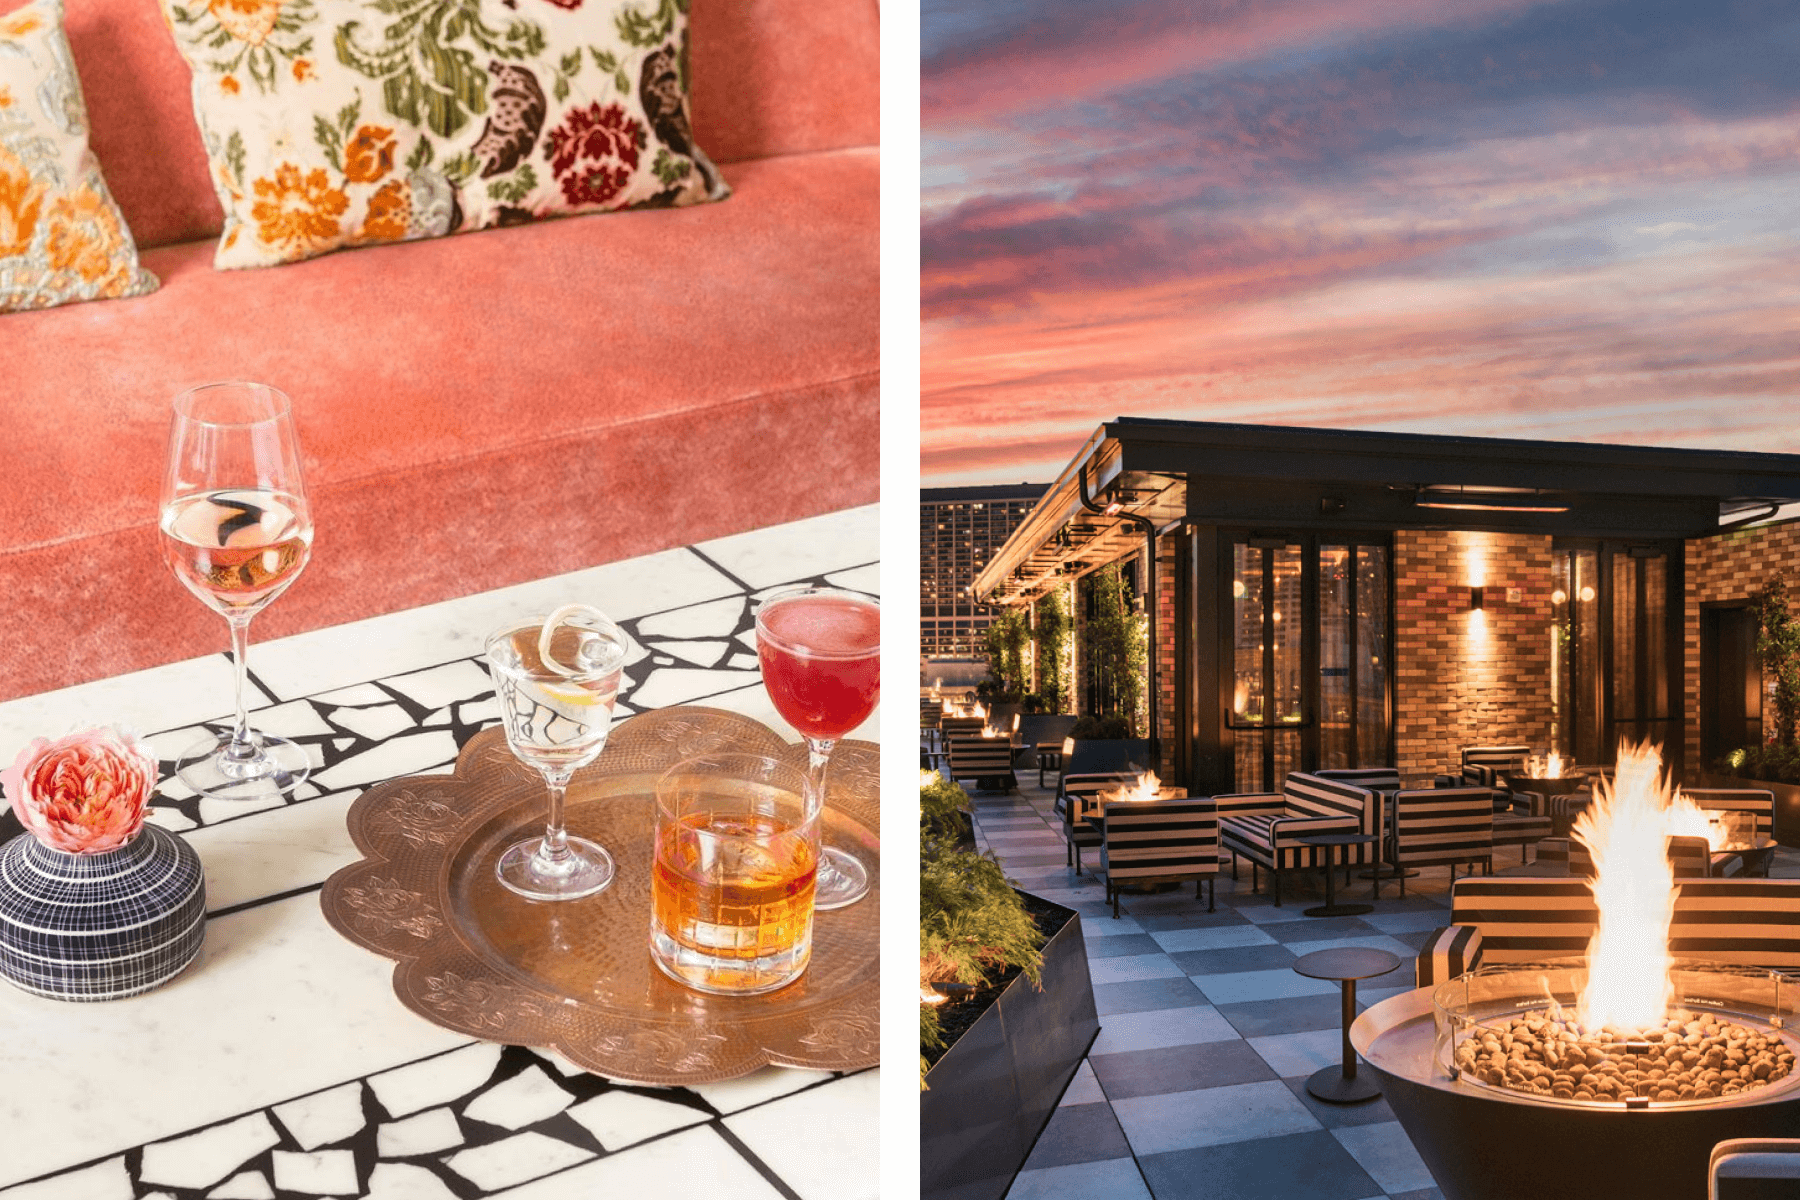 Left: Cocktails on a table next to a pink couch; Right: The rooftop seating at Charmaine’s with a roaring fire.